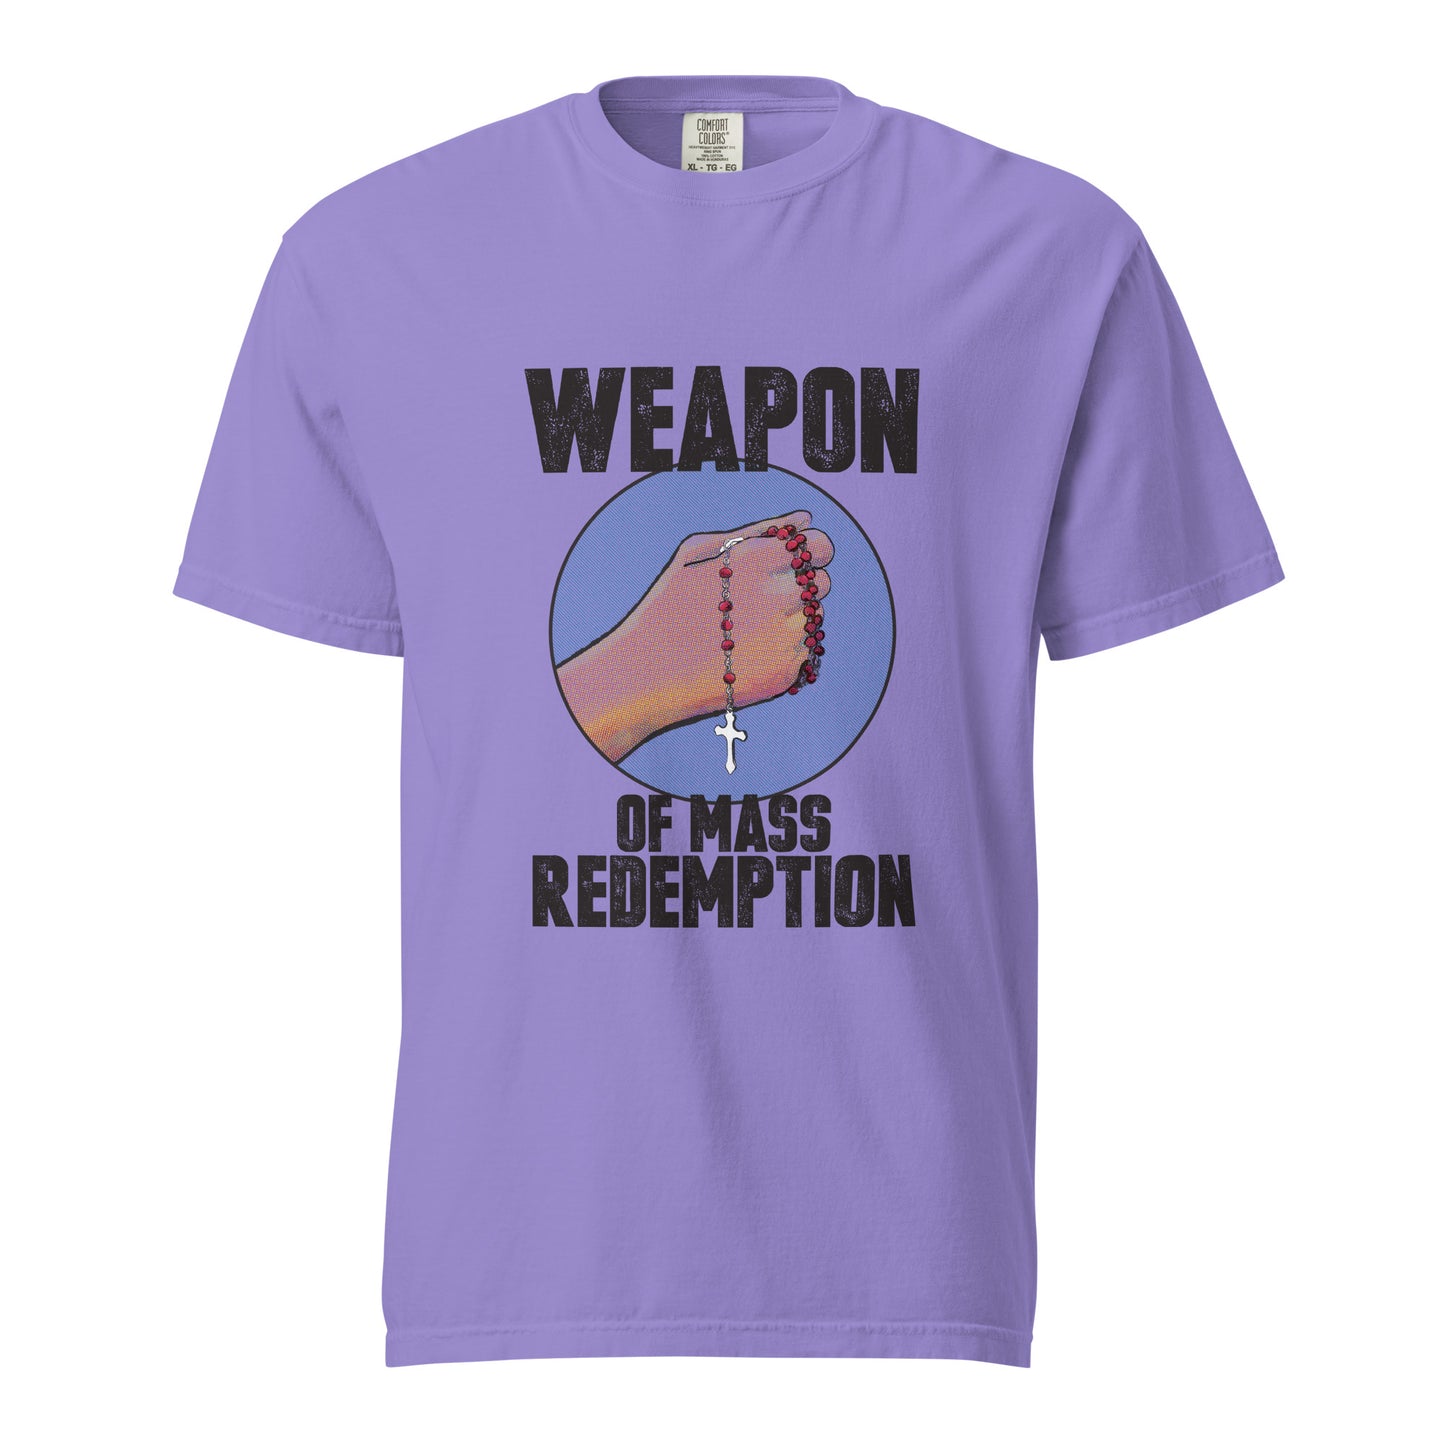 Rosary - Weapon of Mass Redemption - Unisex garment-dyed heavyweight t-shirt